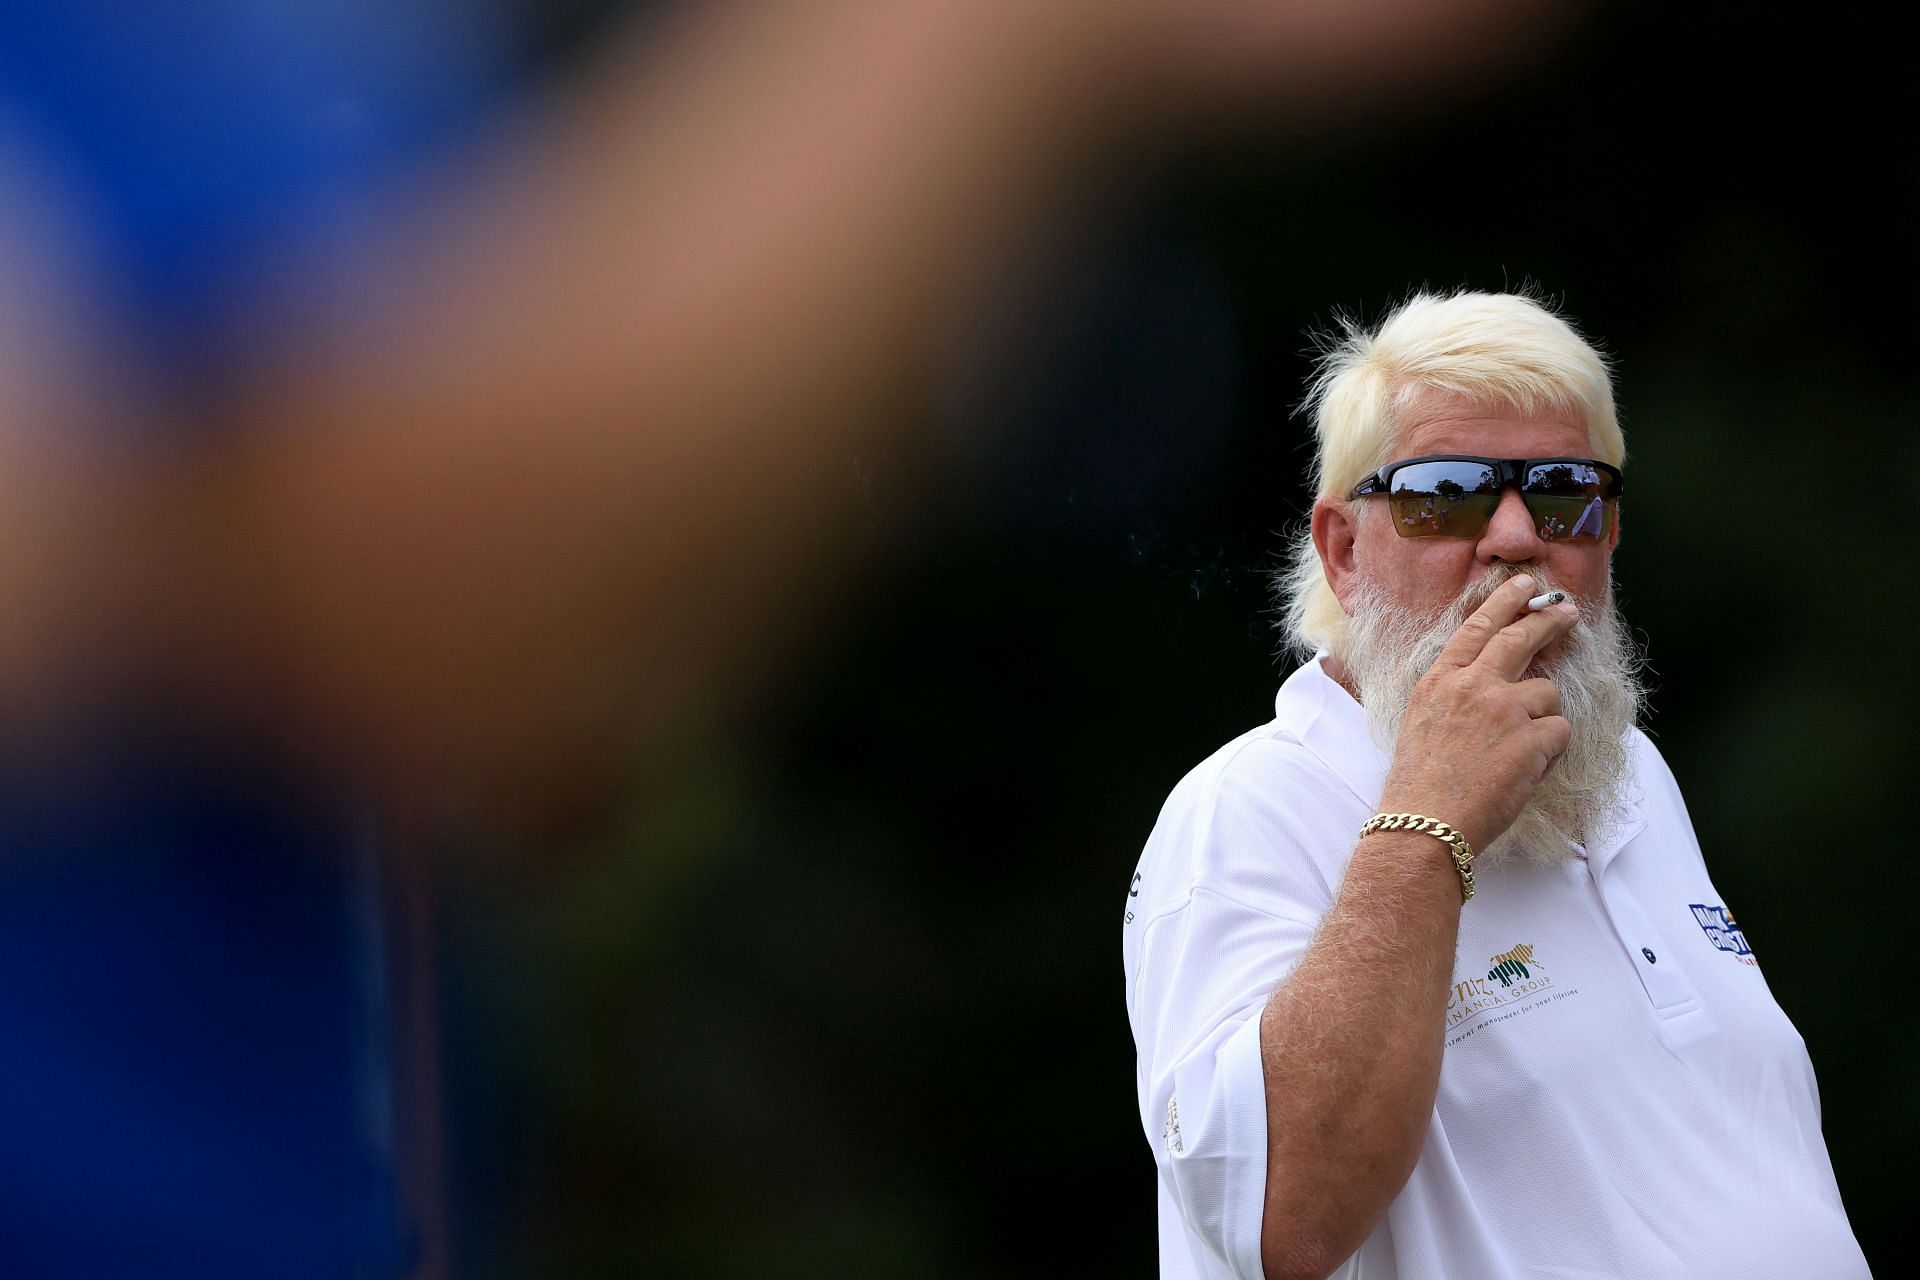 John Daly did not comment on Hailey Davidson